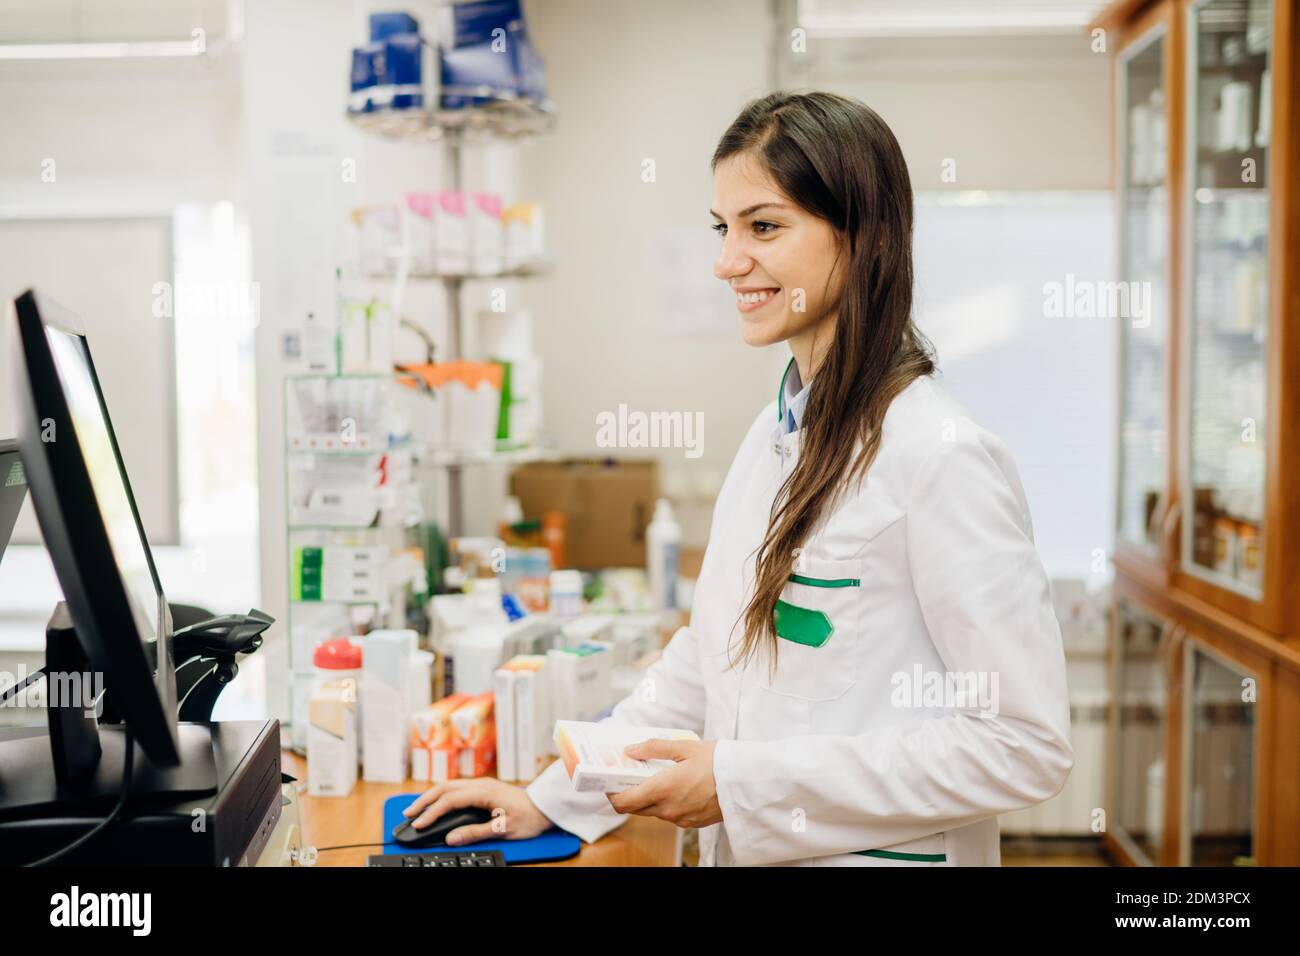 Smiling friendly pharmacist at the counter working in a pharmacy store. Pharmaceutical professional recommending an over the counter supplement. Remot Stock Photo